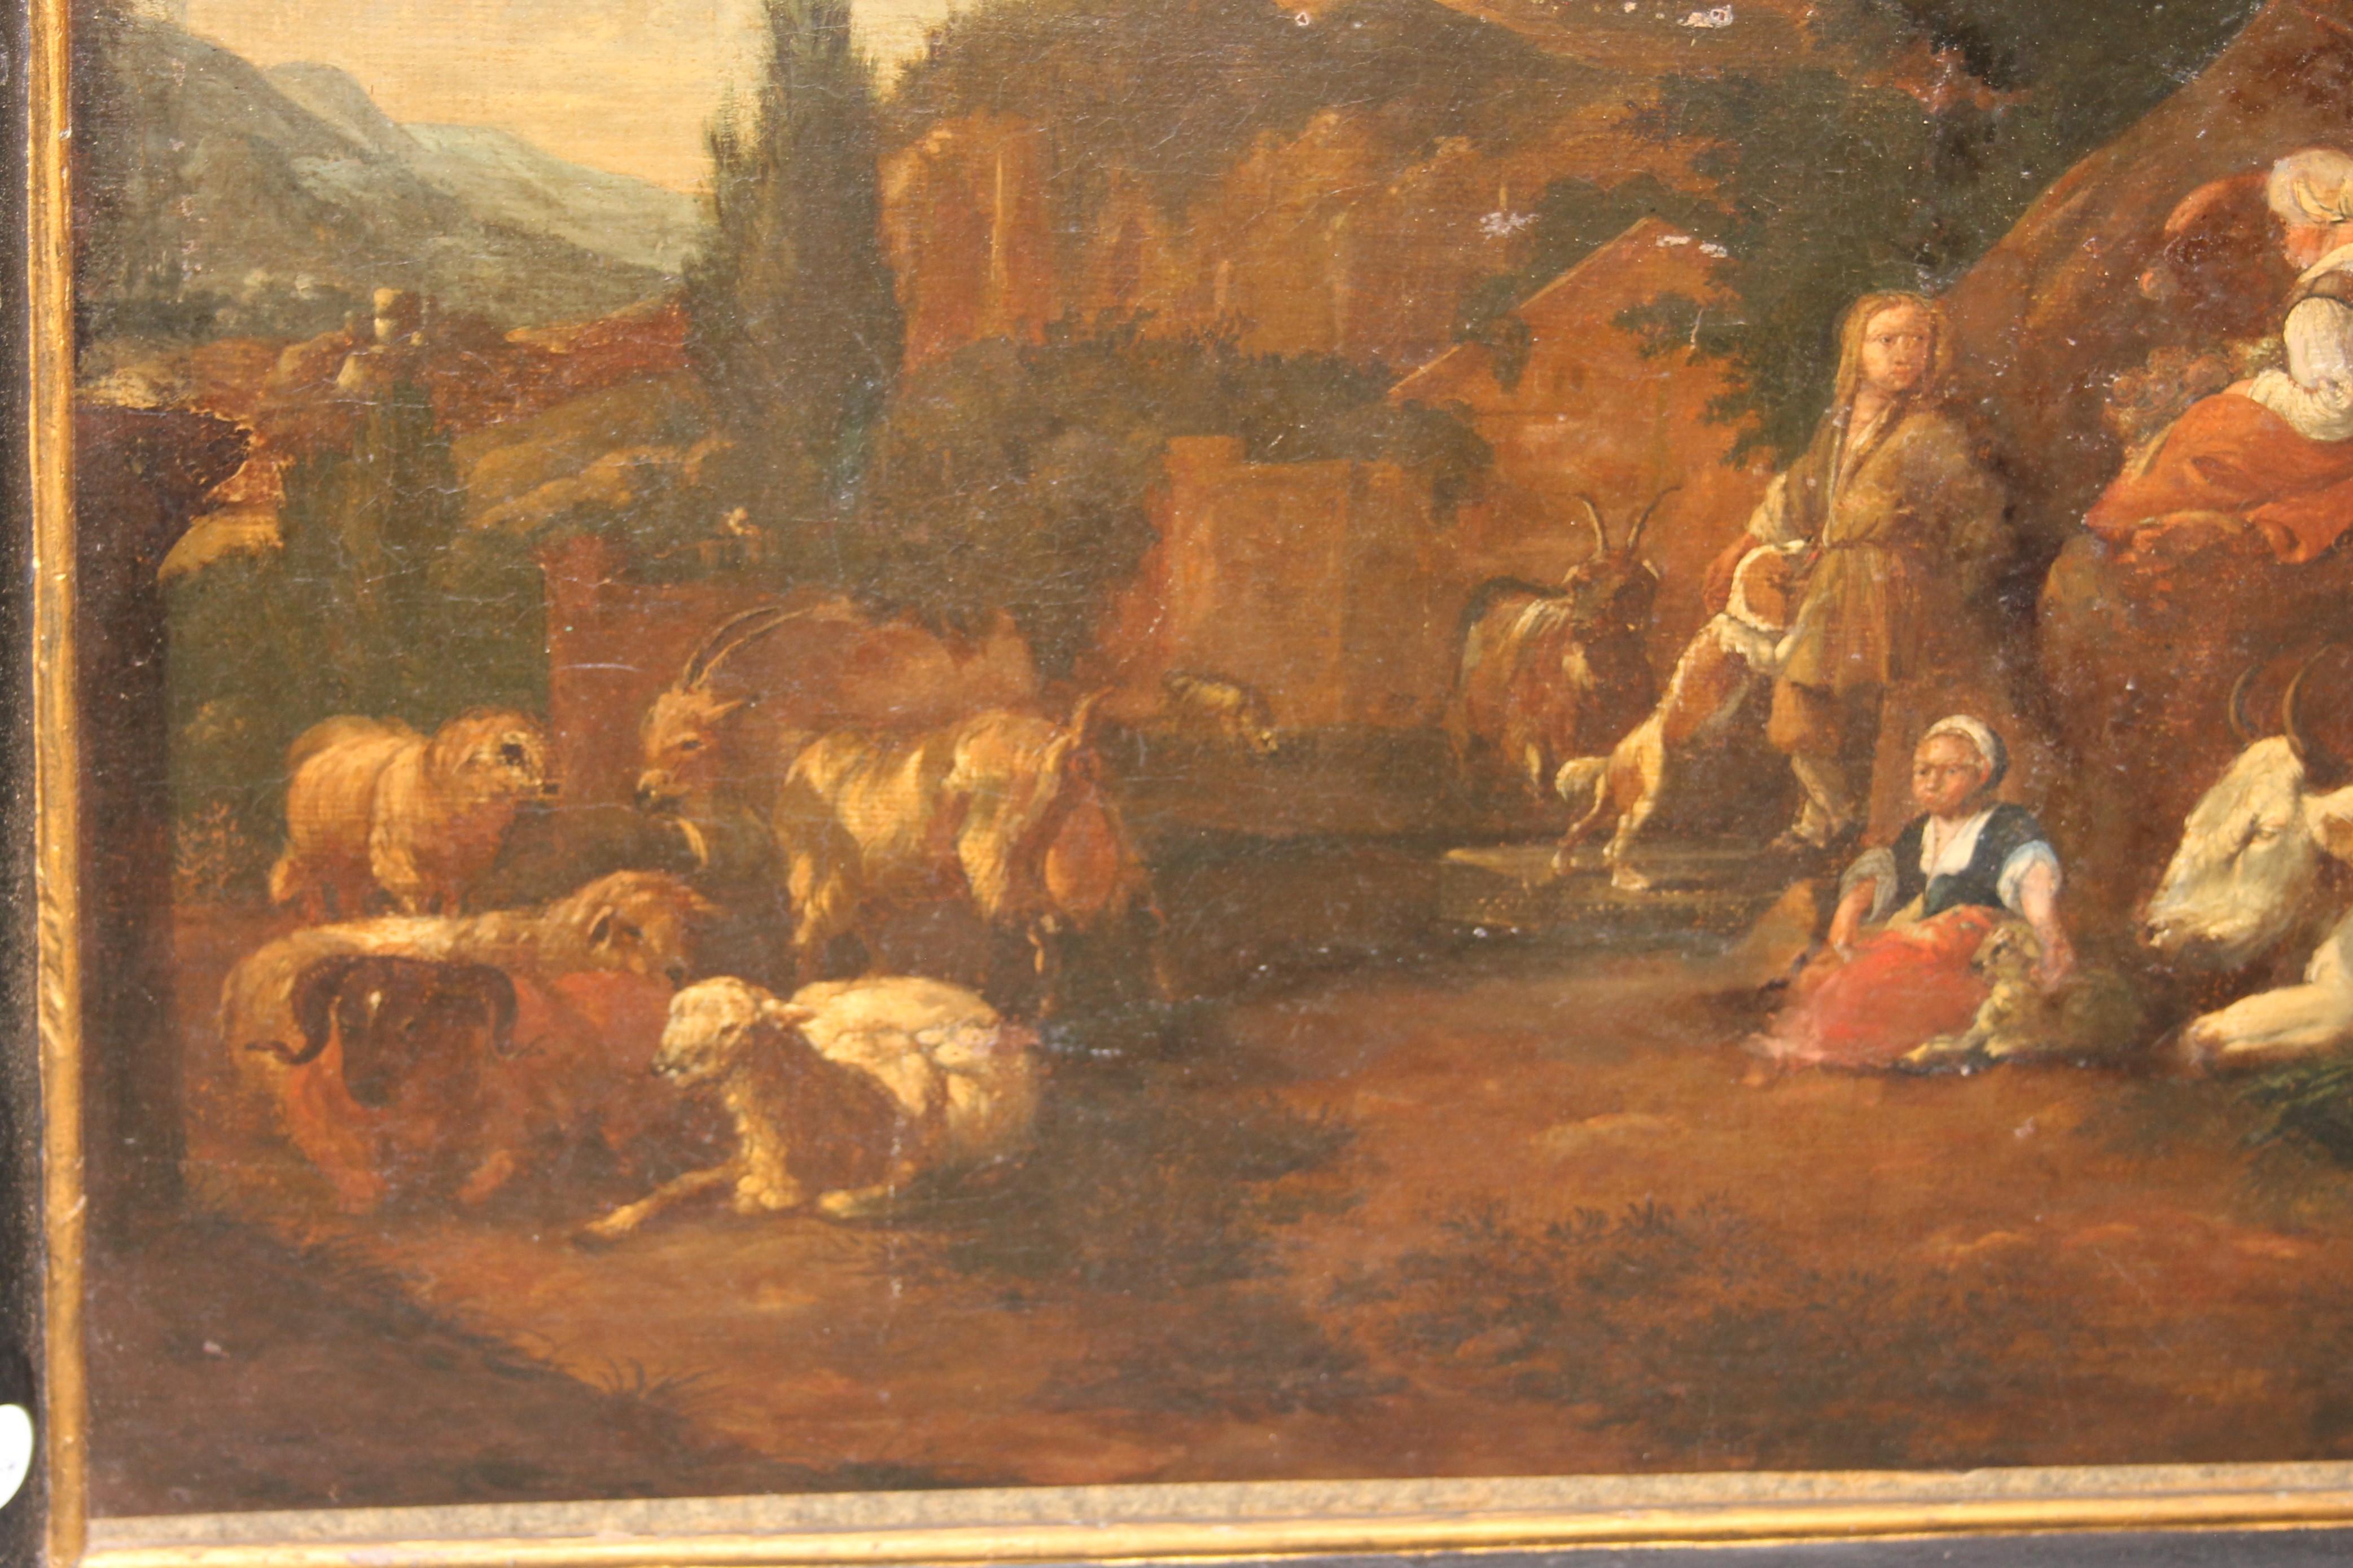 Oiled 17th-century oil on canvas, Flemish school, depicting a pastoral scene with ruin